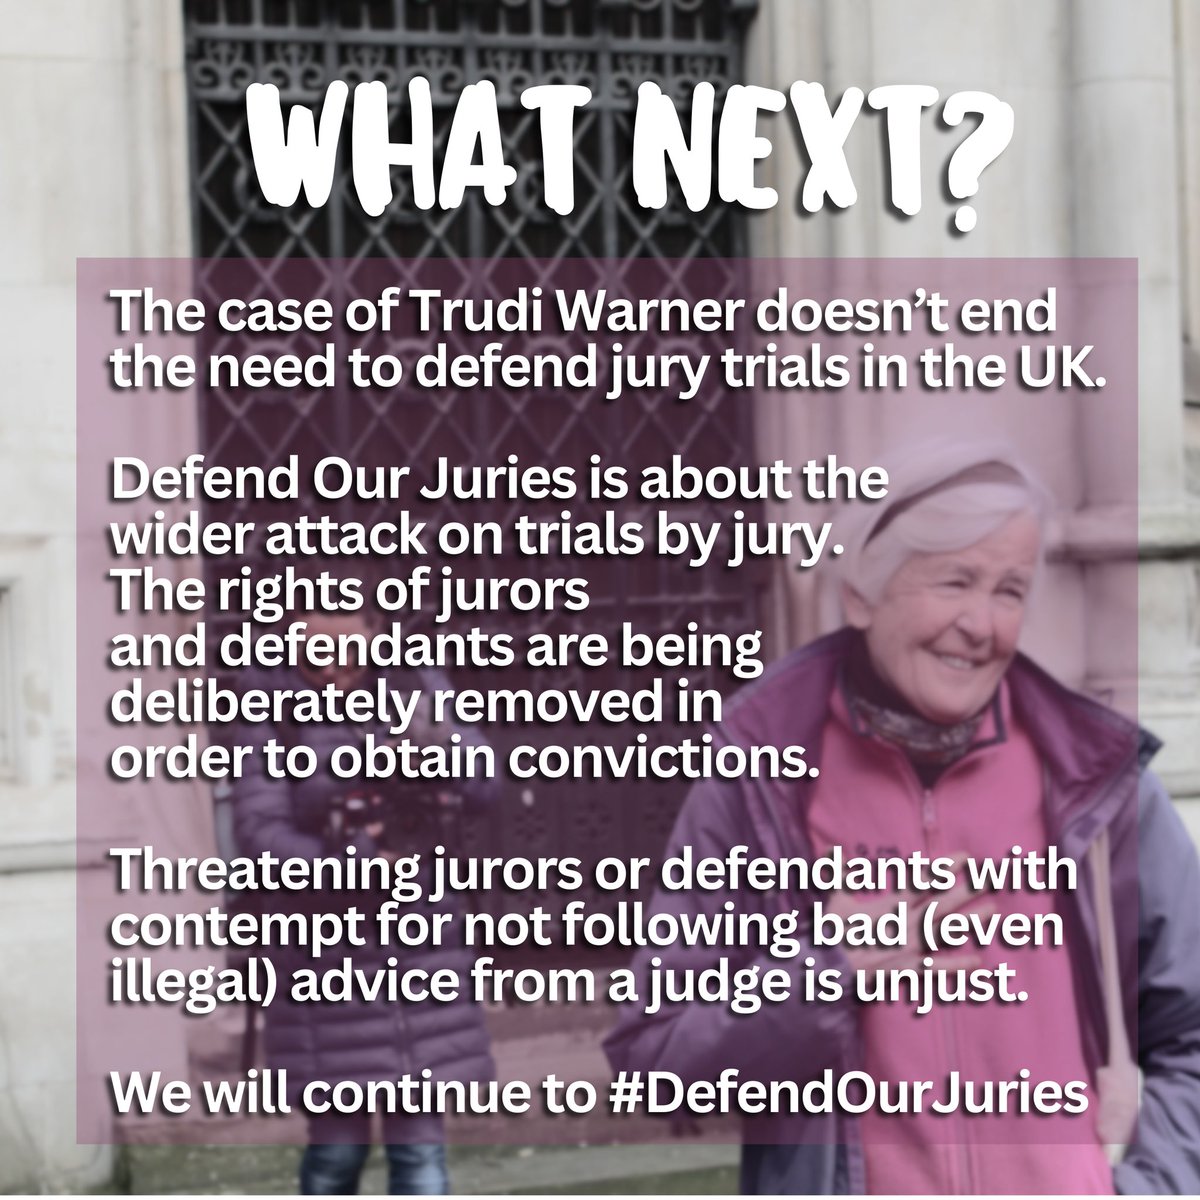 The case of Trudi Warner doesn’t end the need to defend jury trials.

The rights of jurors and defendants are being removed in order to obtain convictions.

Threatening jurors or defendants with contempt for not following bad (even illegal) directions from a judge is unjust.